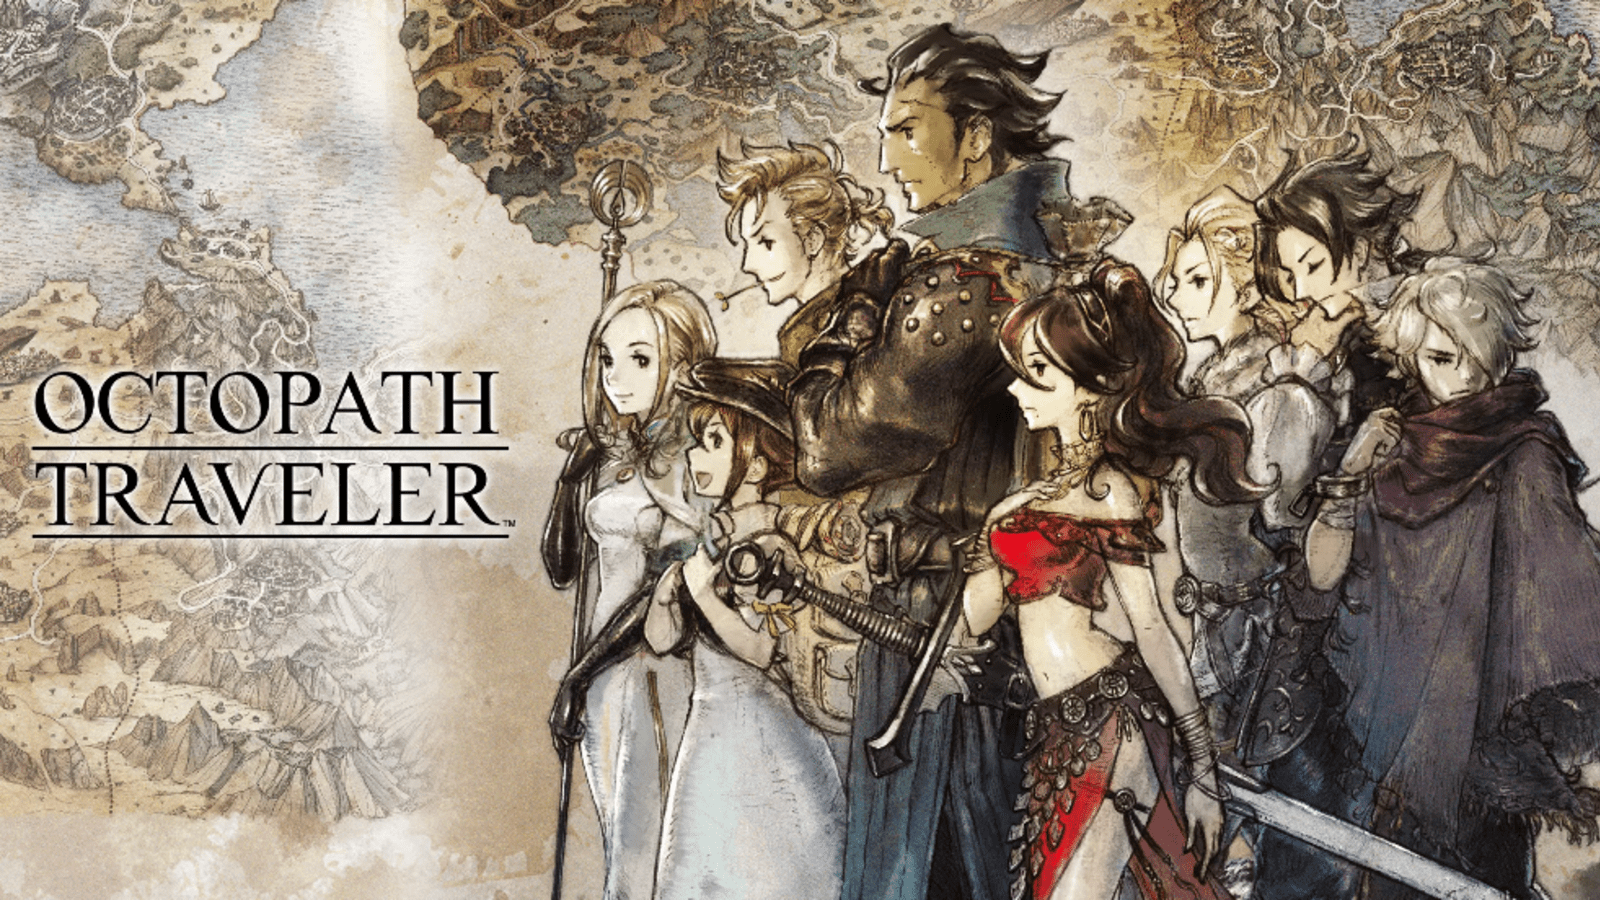 Nintendo Switch RPG Octopath Traveler Won't Have DLC Because It's “A